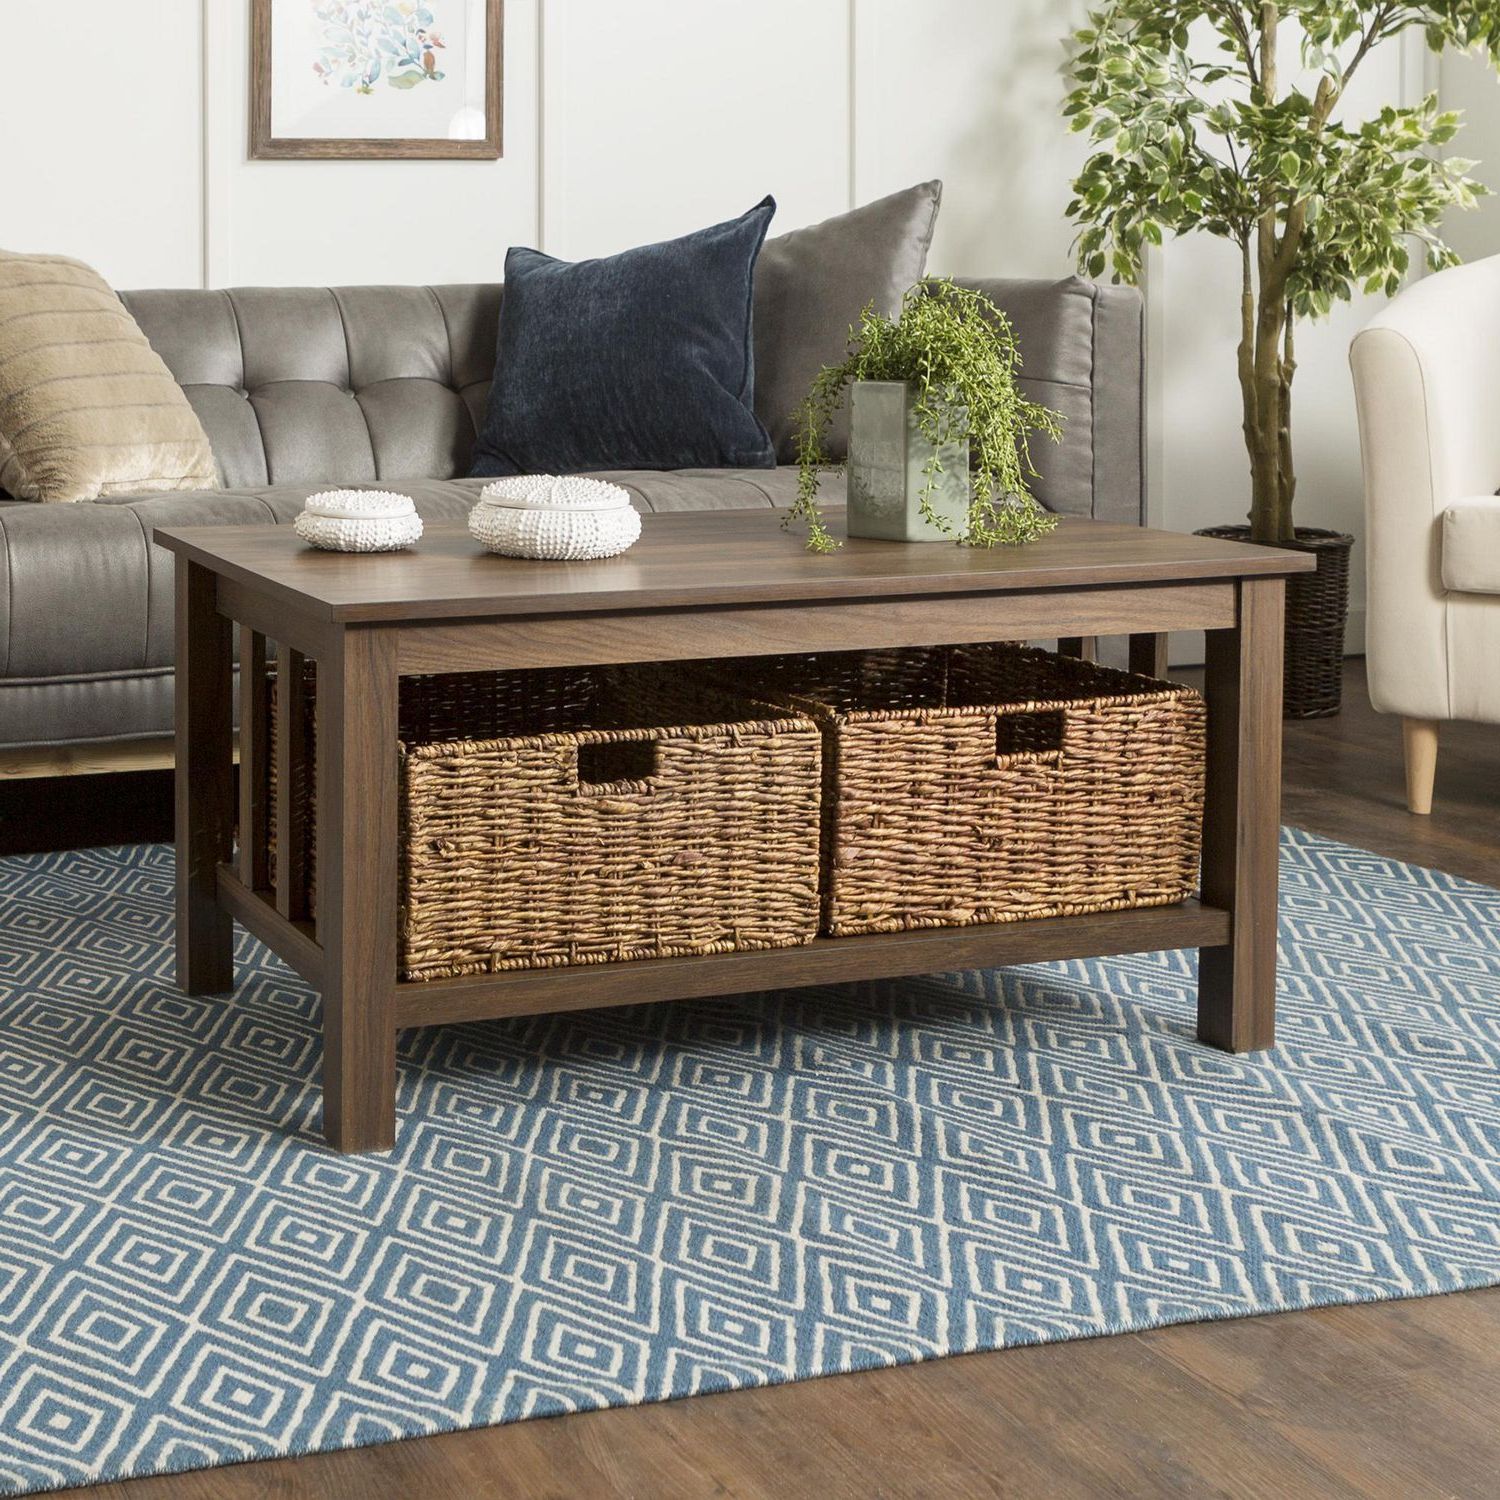 Walmart Canada Within Coffee Tables With Storage (View 15 of 15)